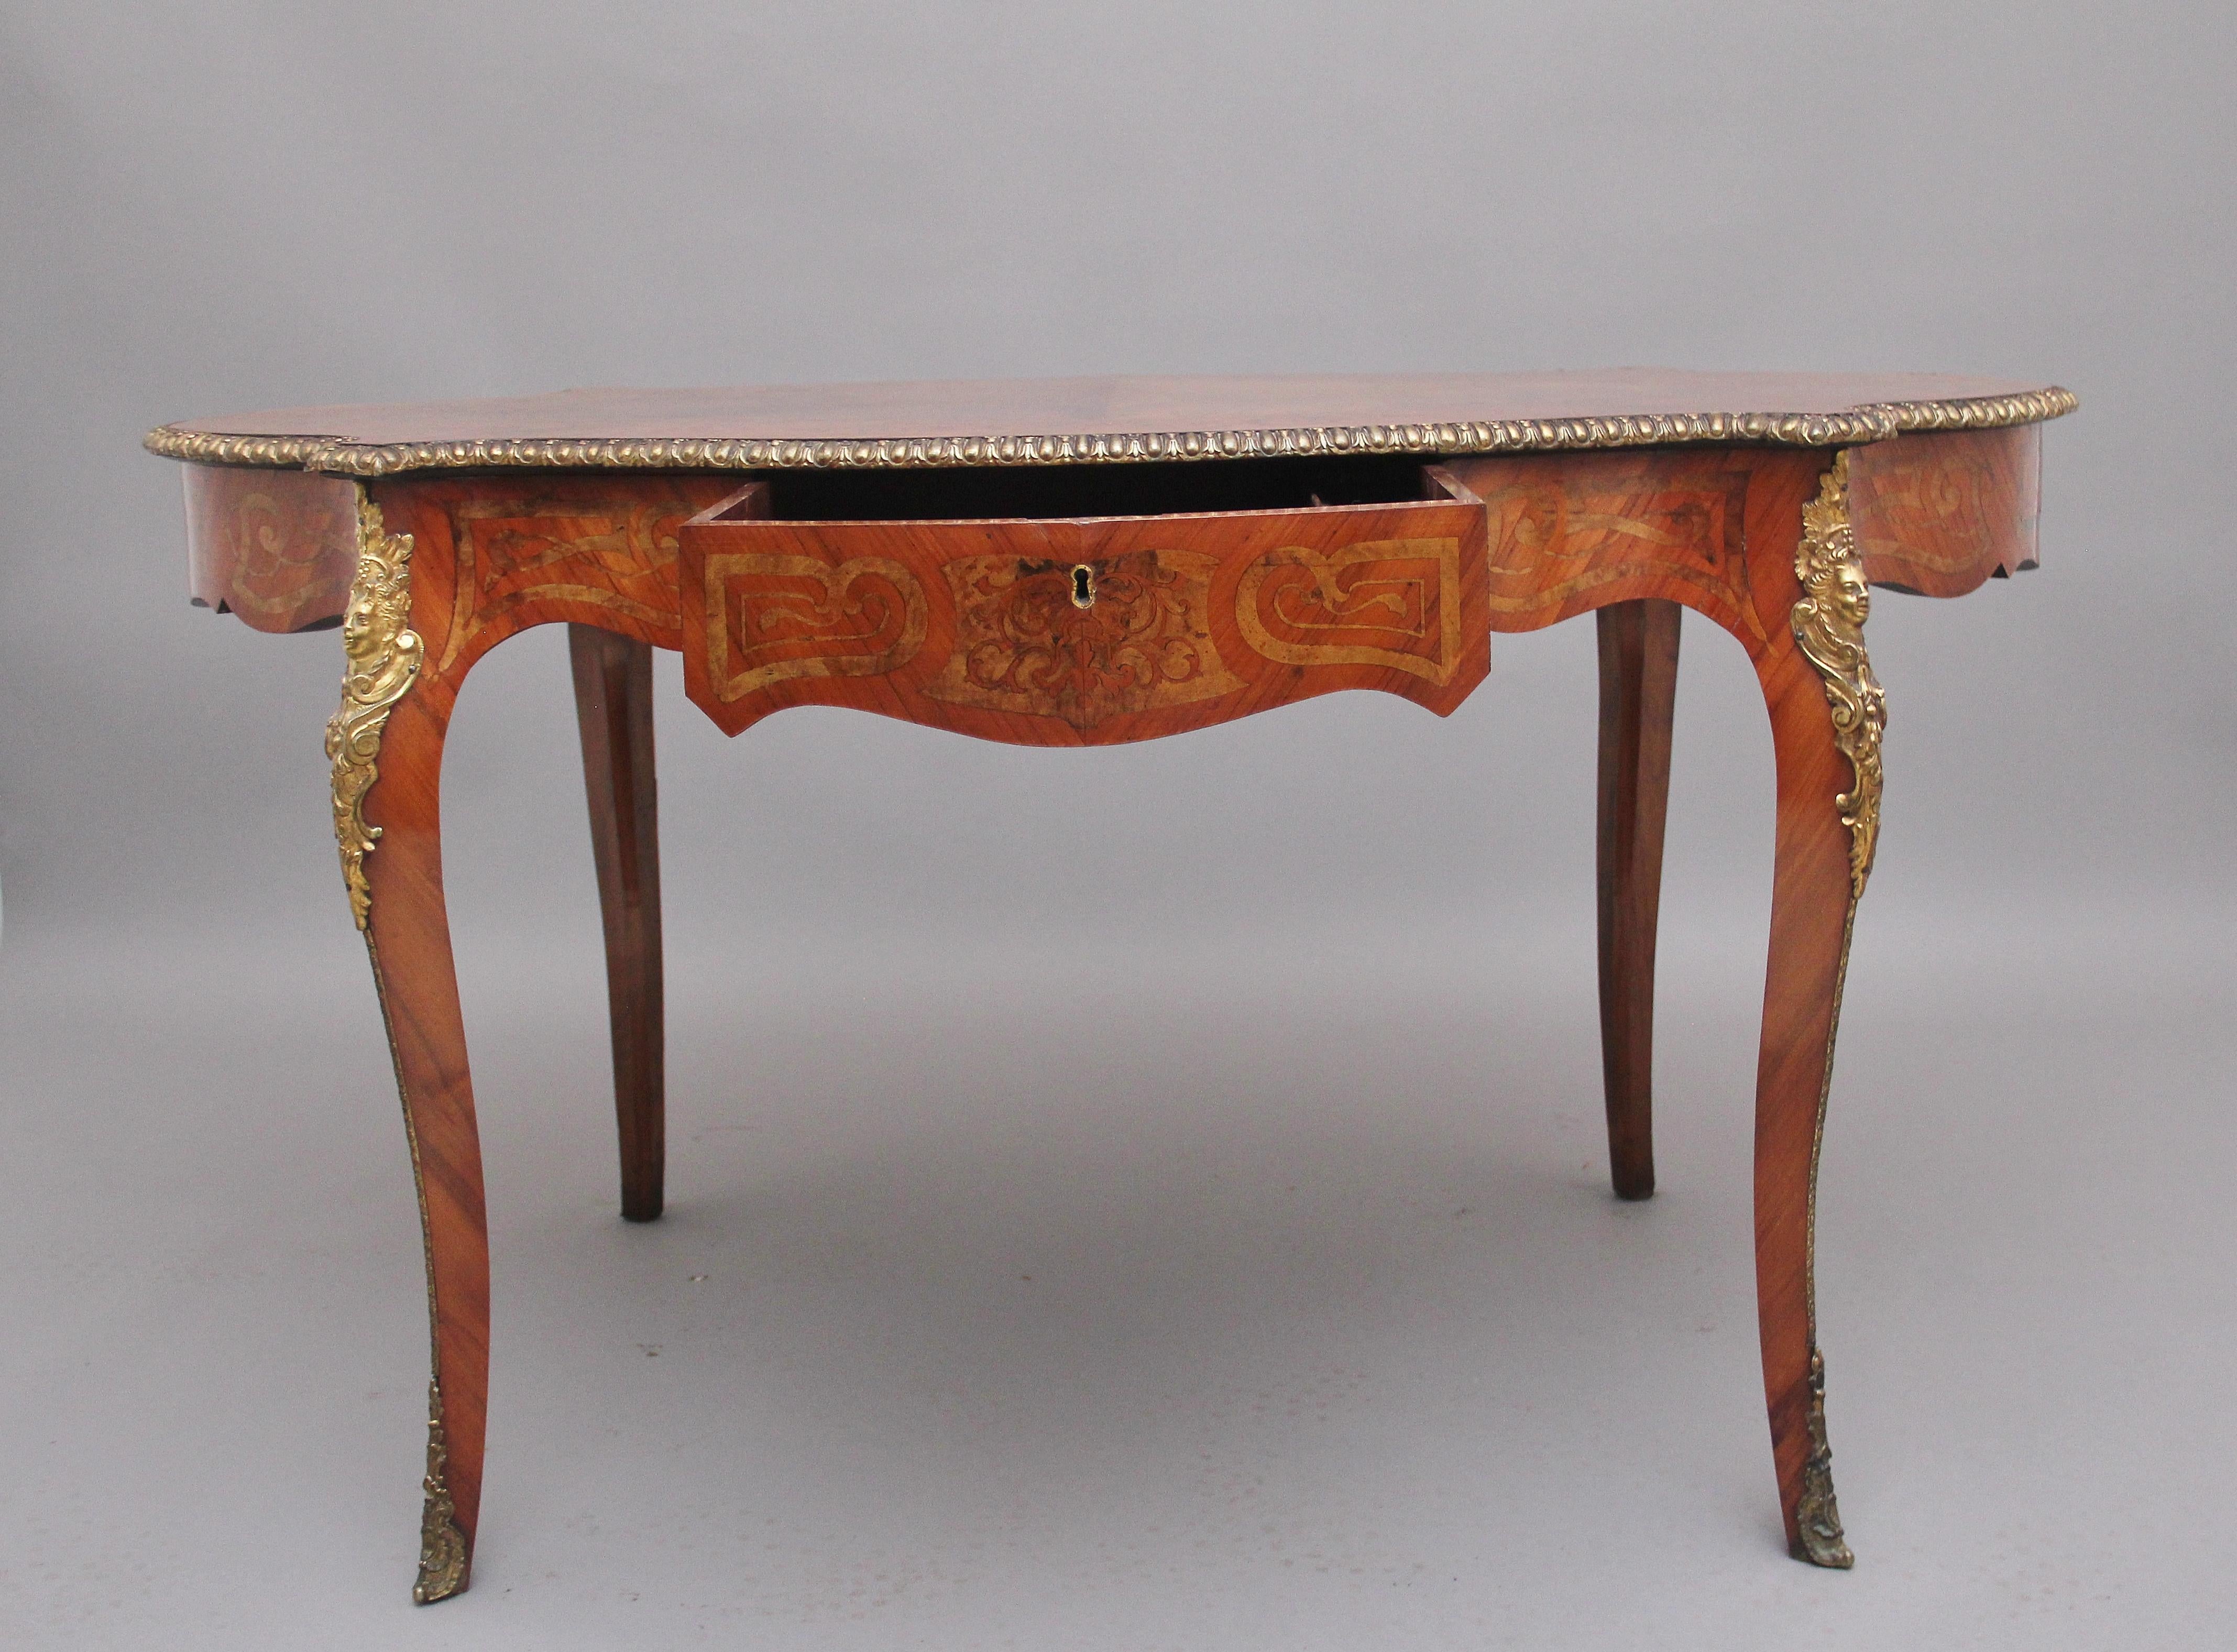 A superb quality 19th Century walnut and inlaid centre table, the shaped top profusely inlaid with various decorative patterns, having an oval panel at the centre with a lovely figured quarter veneered top, finely carved ormolu moulded edge running